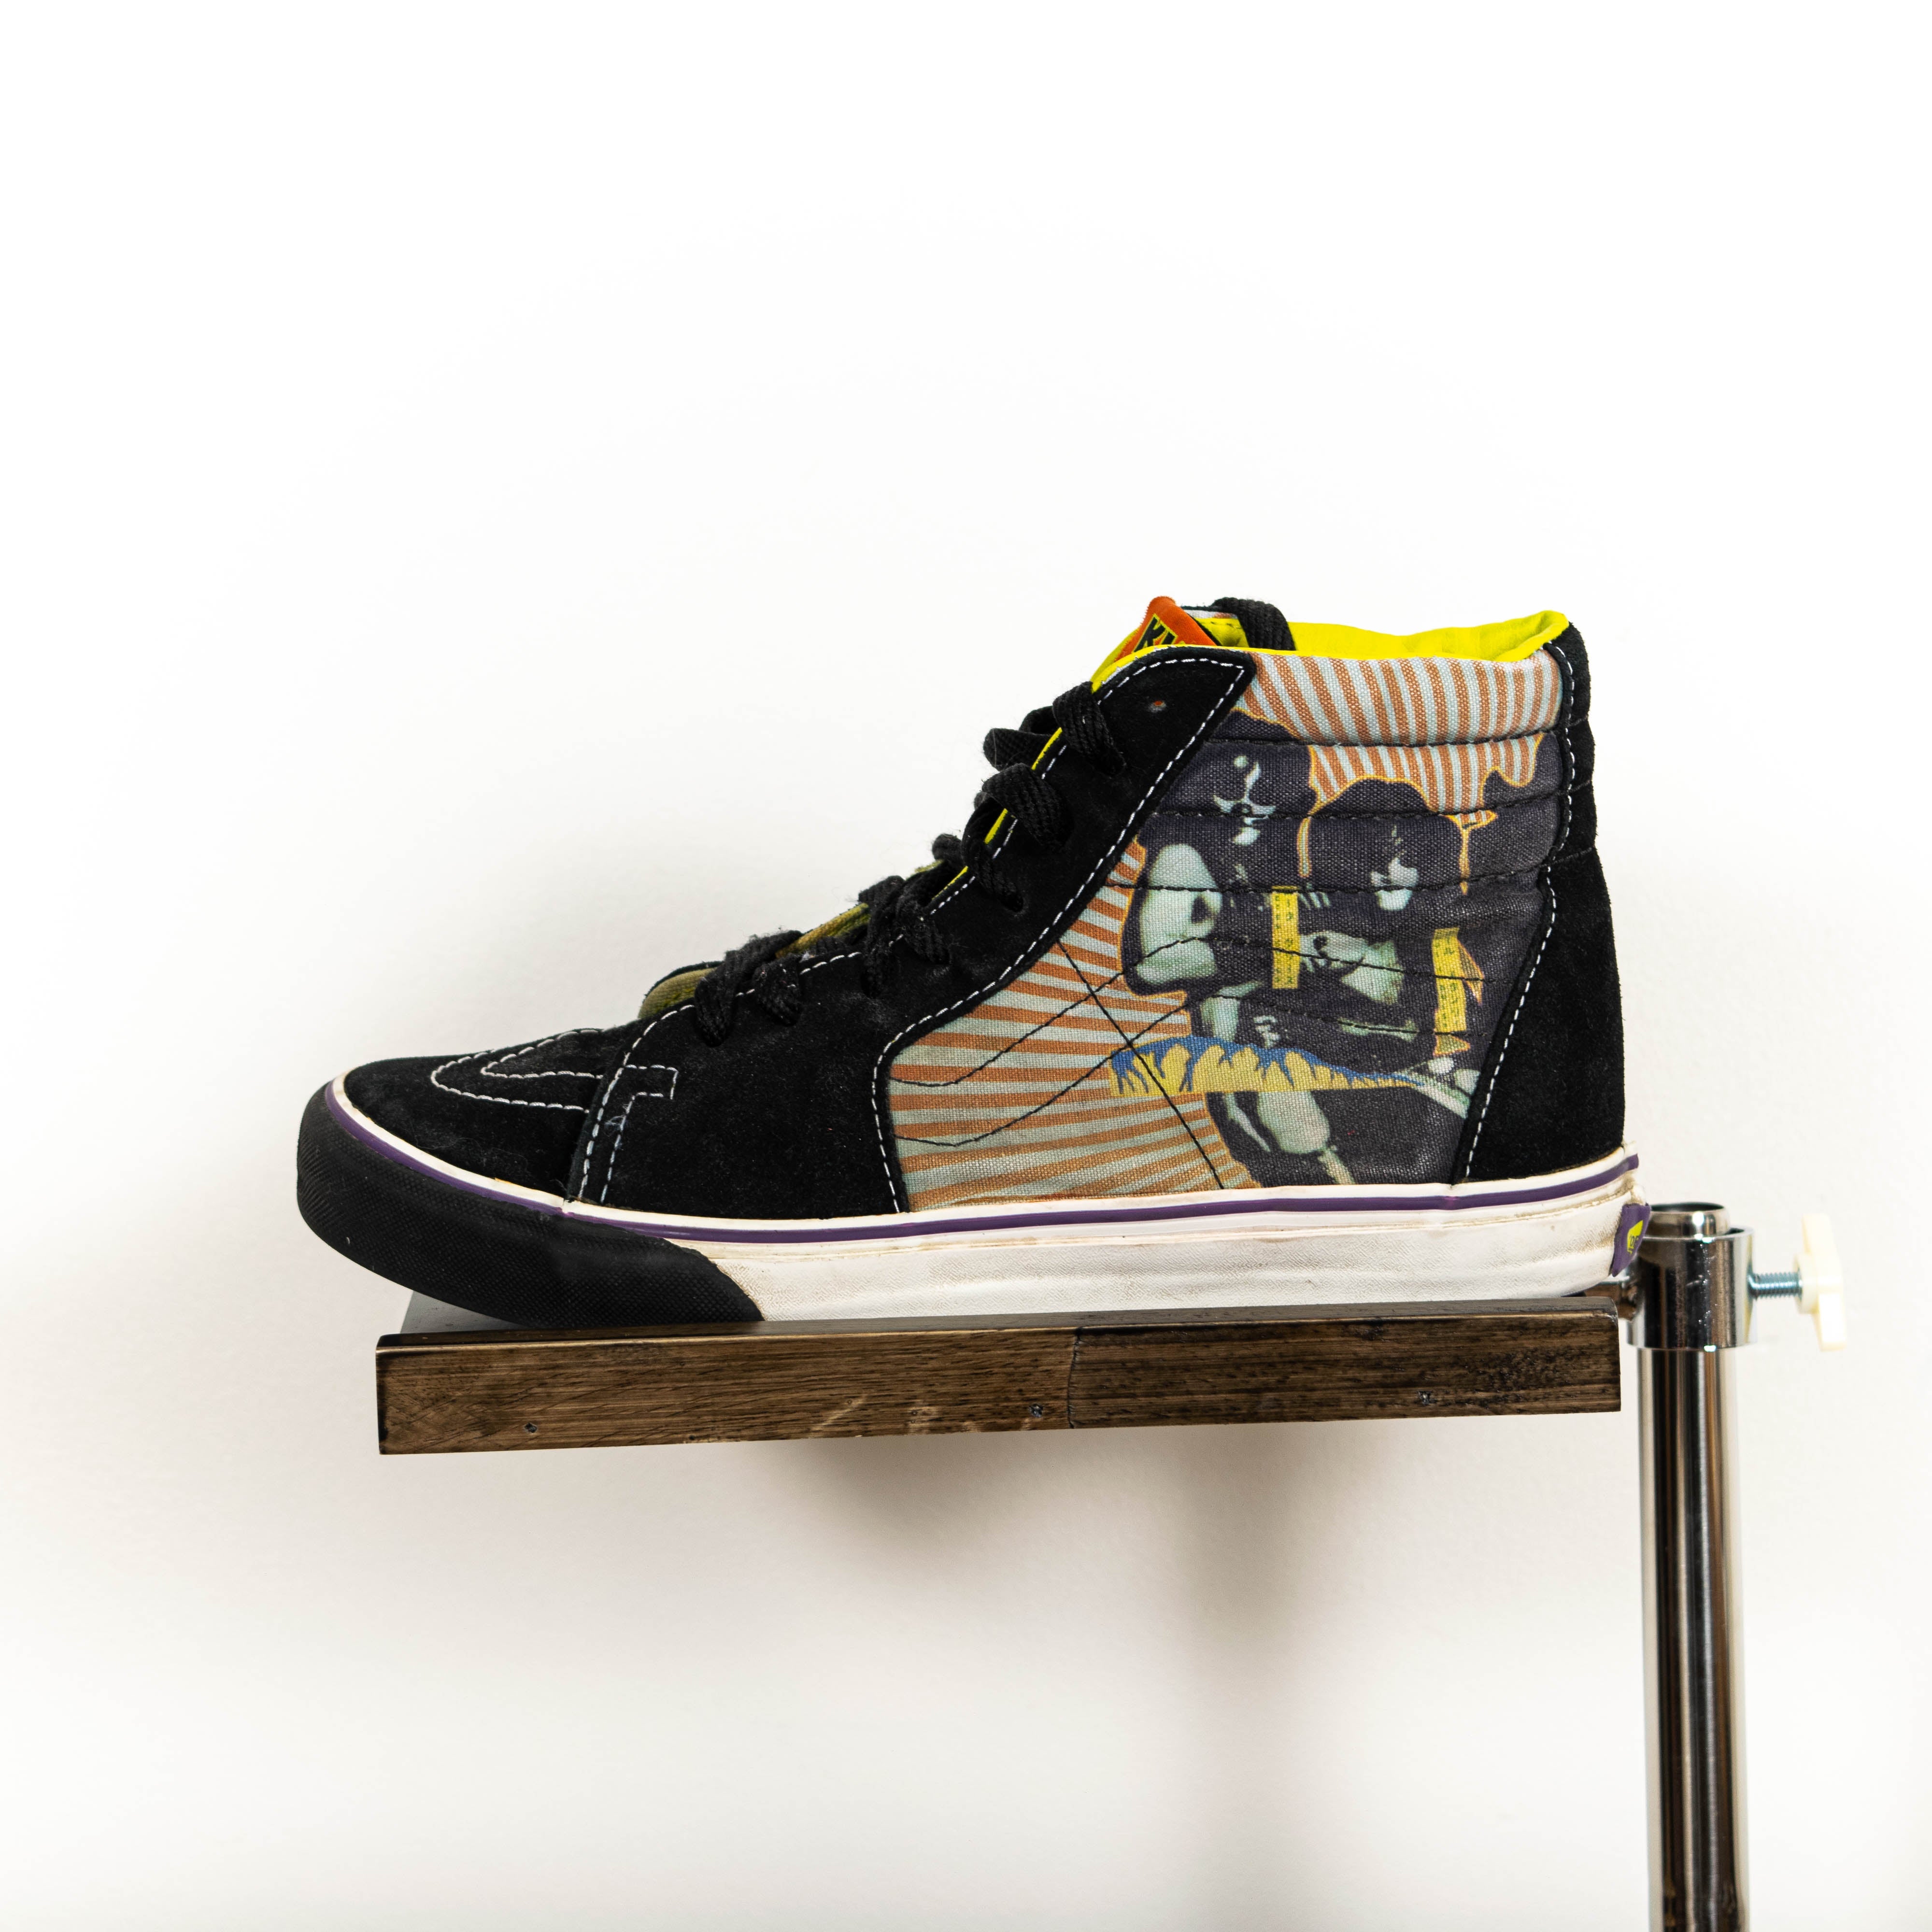 Vans Kiss Rock And Roll Over Multicolor Limited Edition High Top Sneakers Mens EU41